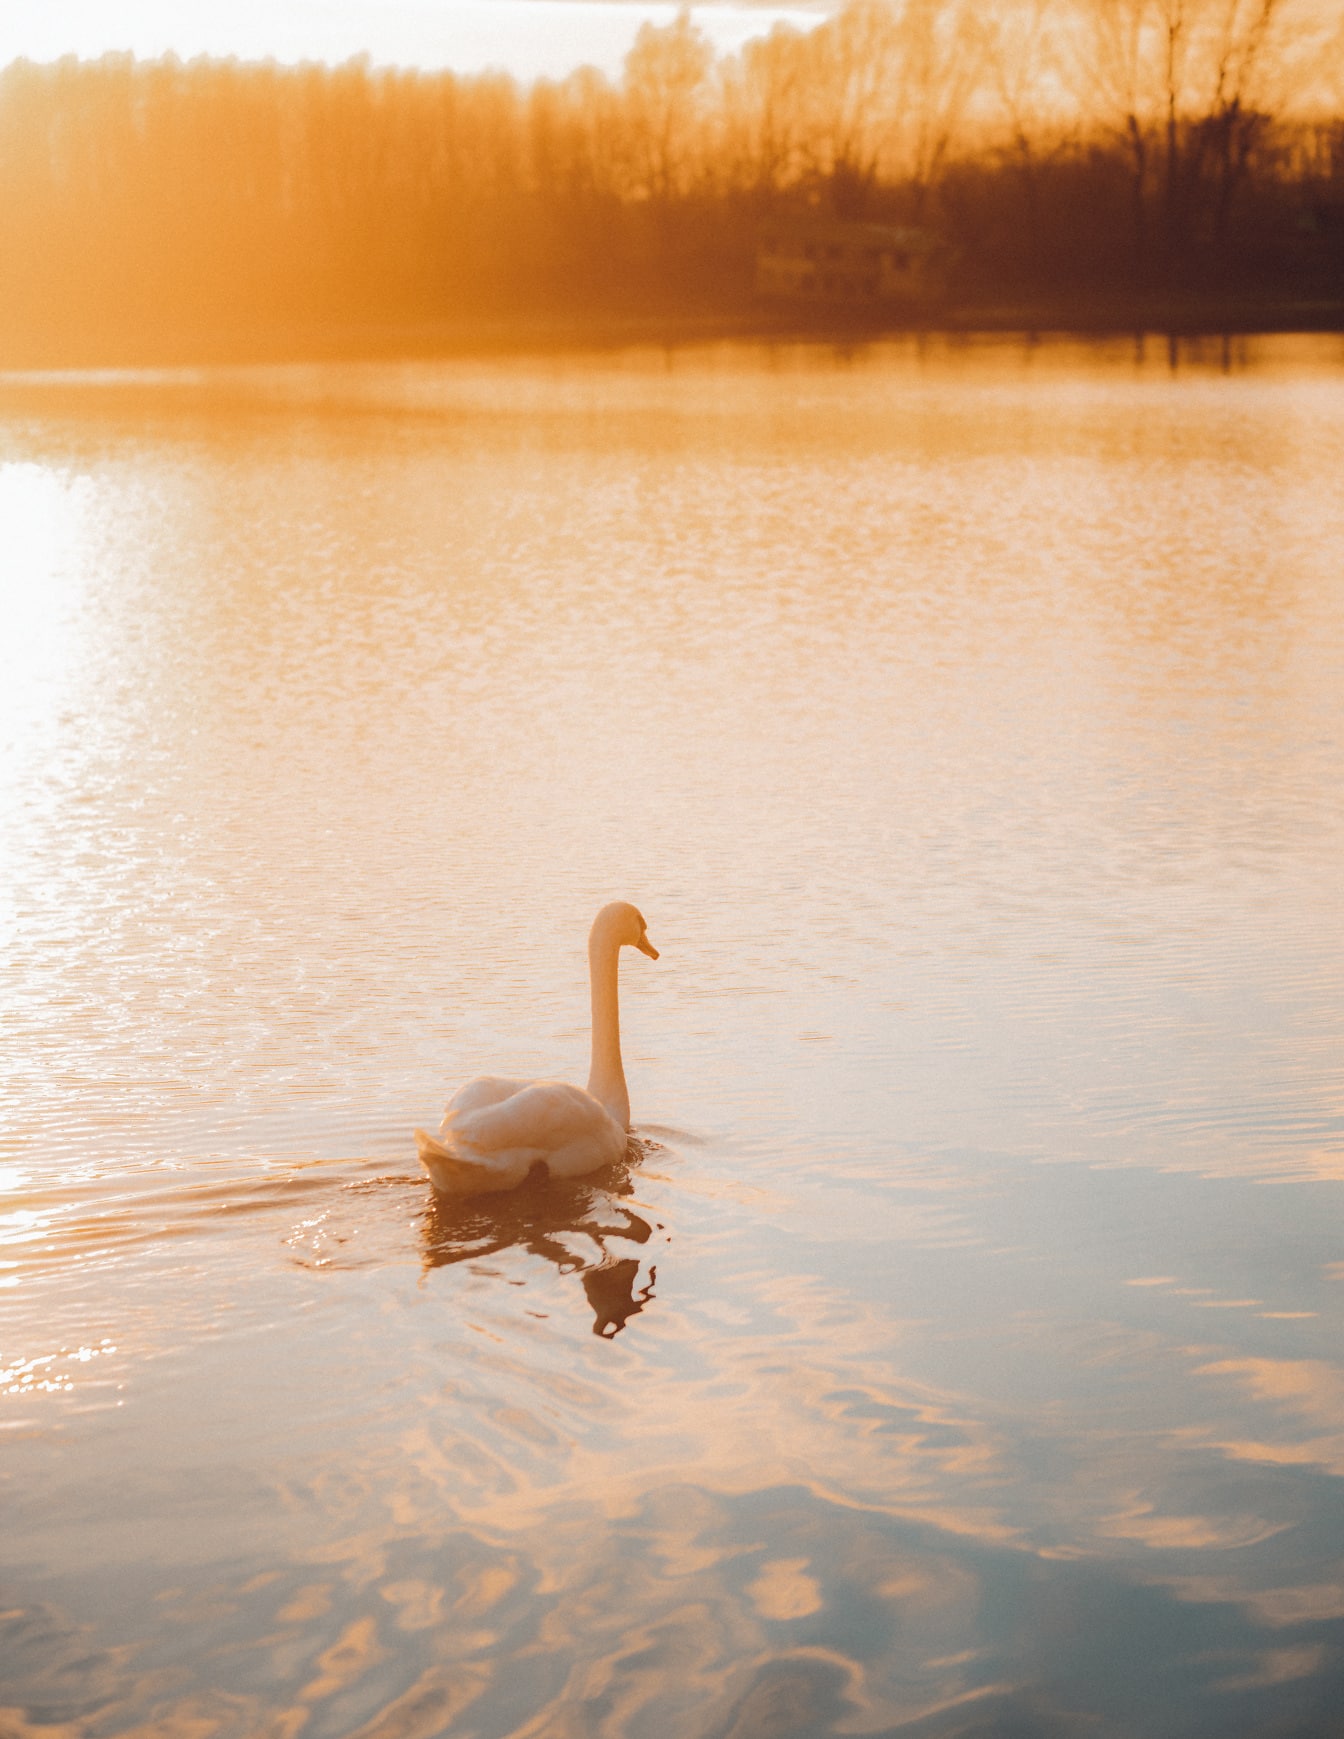 Swan swimming on lake in bright sunny sunset